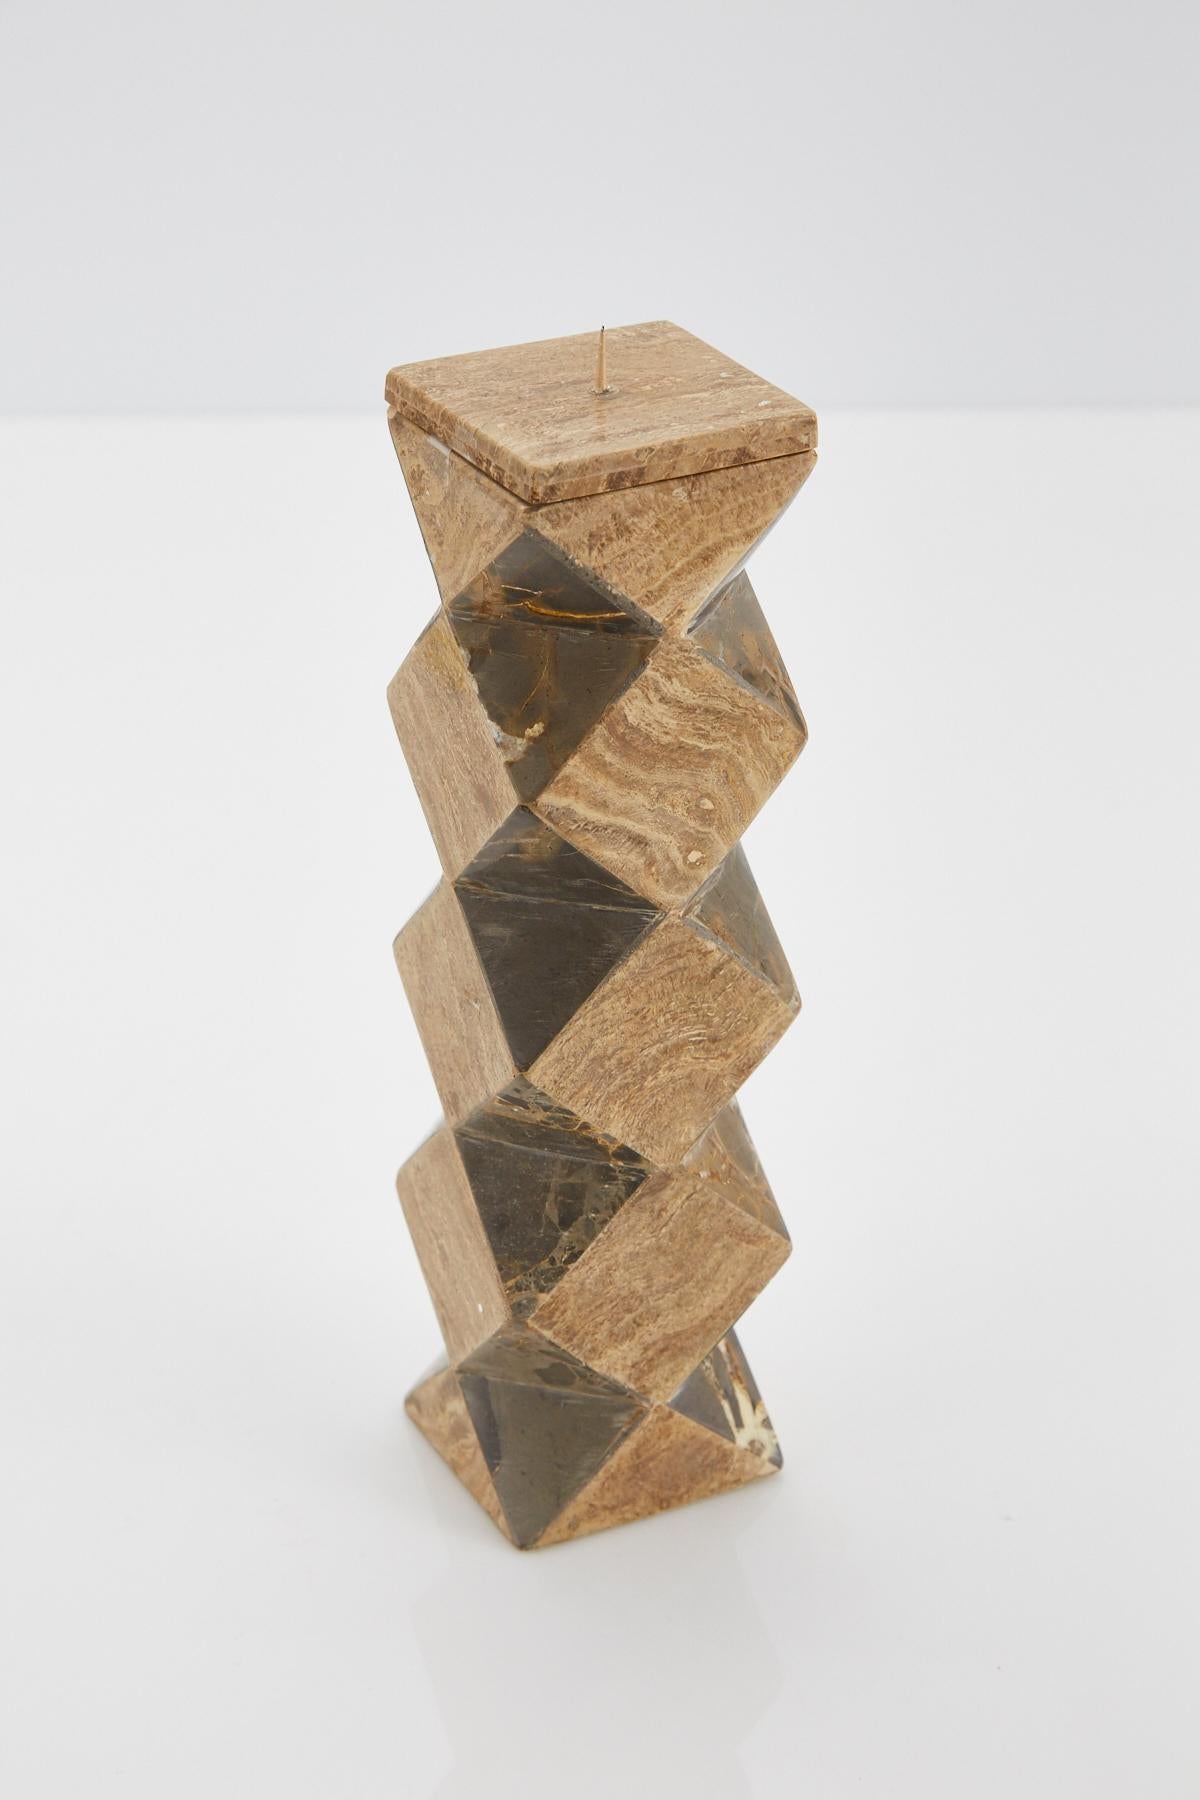 Convertible Faceted Postmodern Tessellated Stone Candlestick or Vase, 1990s For Sale 1